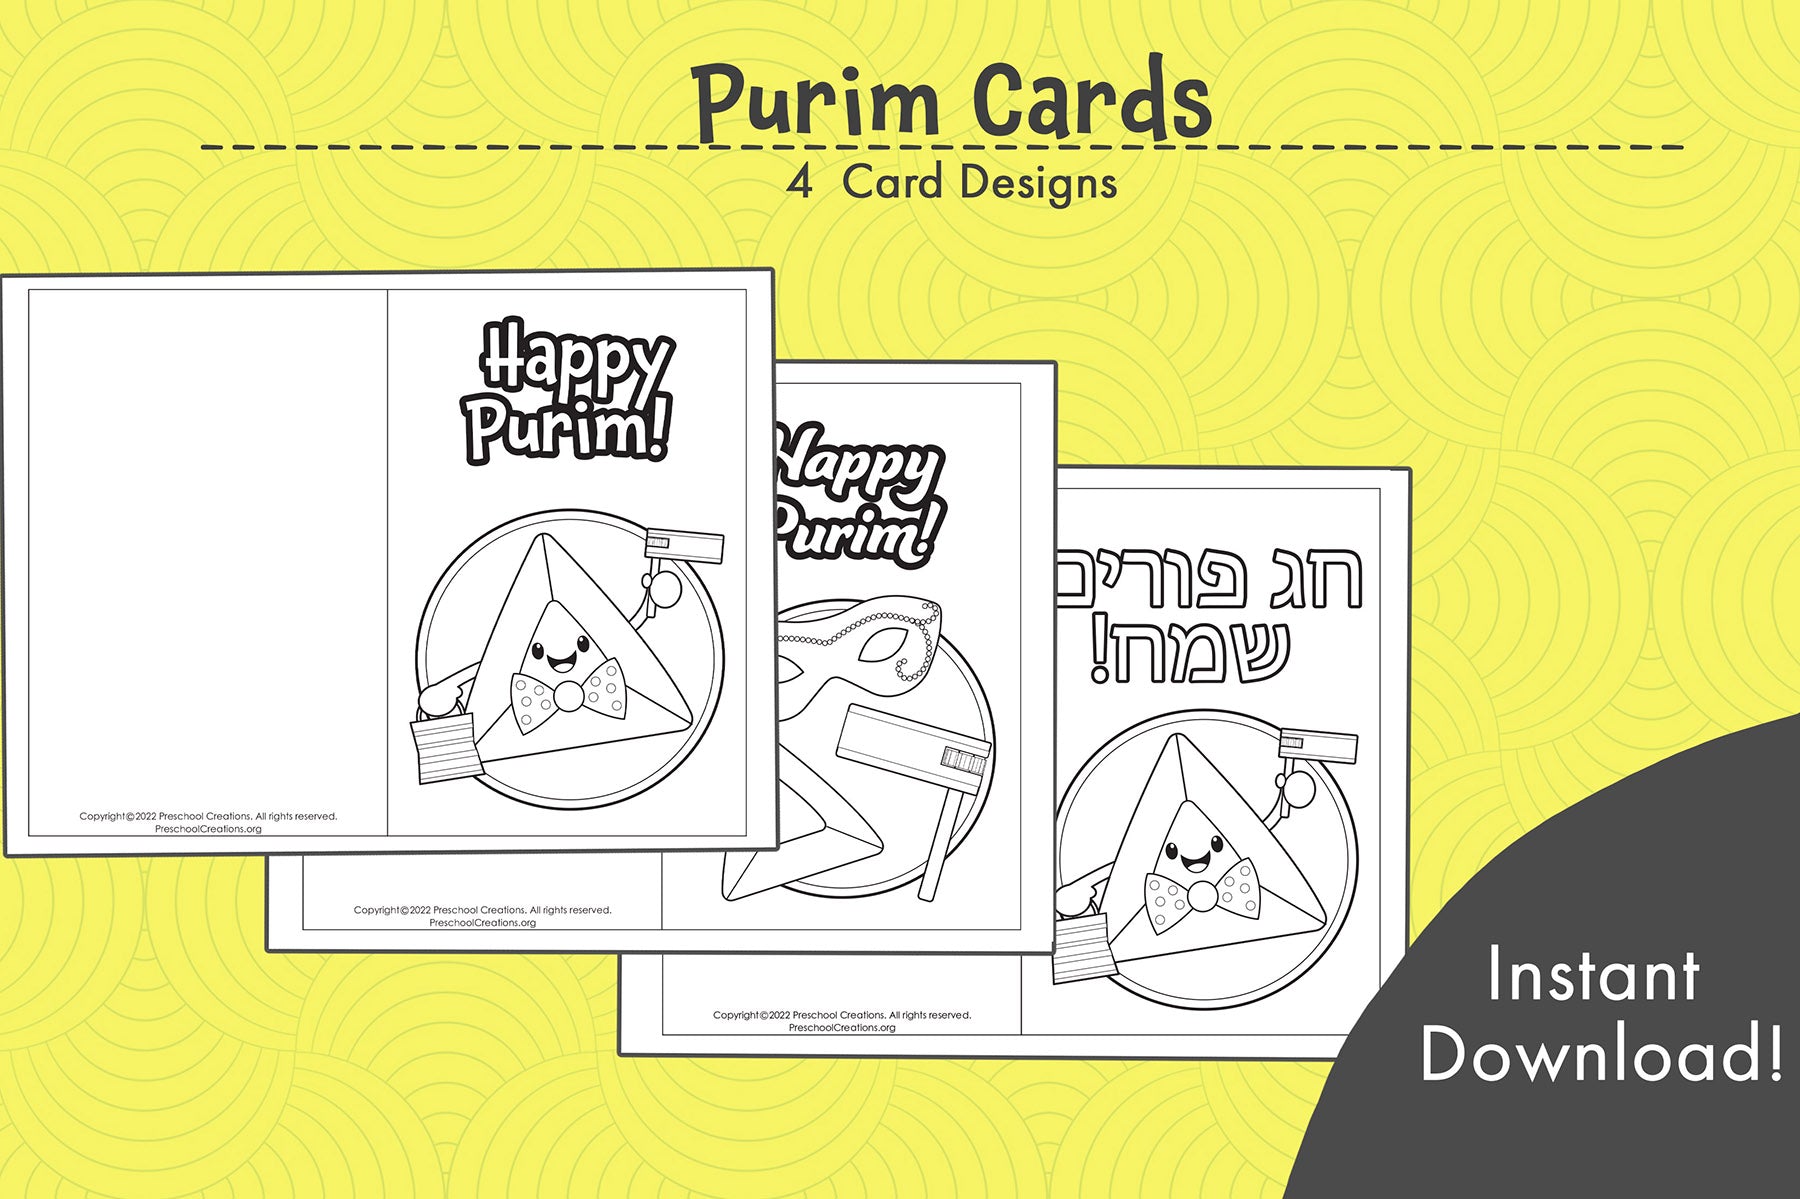 Printable Purim cards for you to send to family and friends to wish them a Happy Purim. The inside is blank so you can write whatever you'd like and you can paste a photo in it as well.   These Purim cards are great to add on to your mishloach manot to write a personalized message to teachers, family and friends.